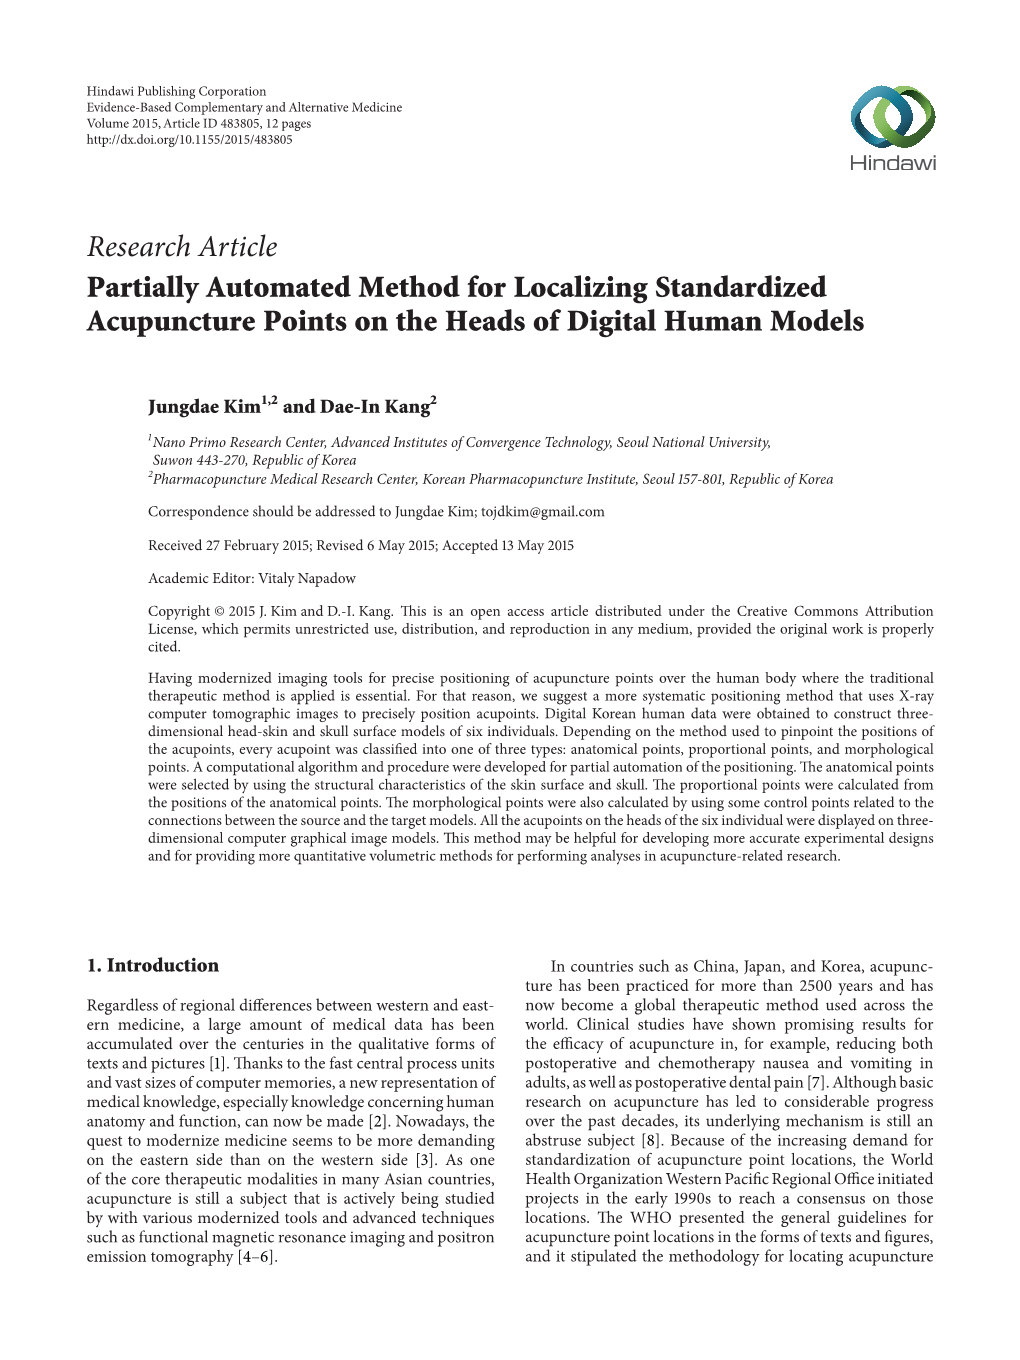 Partially Automated Method for Localizing Standardized Acupuncture Points on the Heads of Digital Human Models